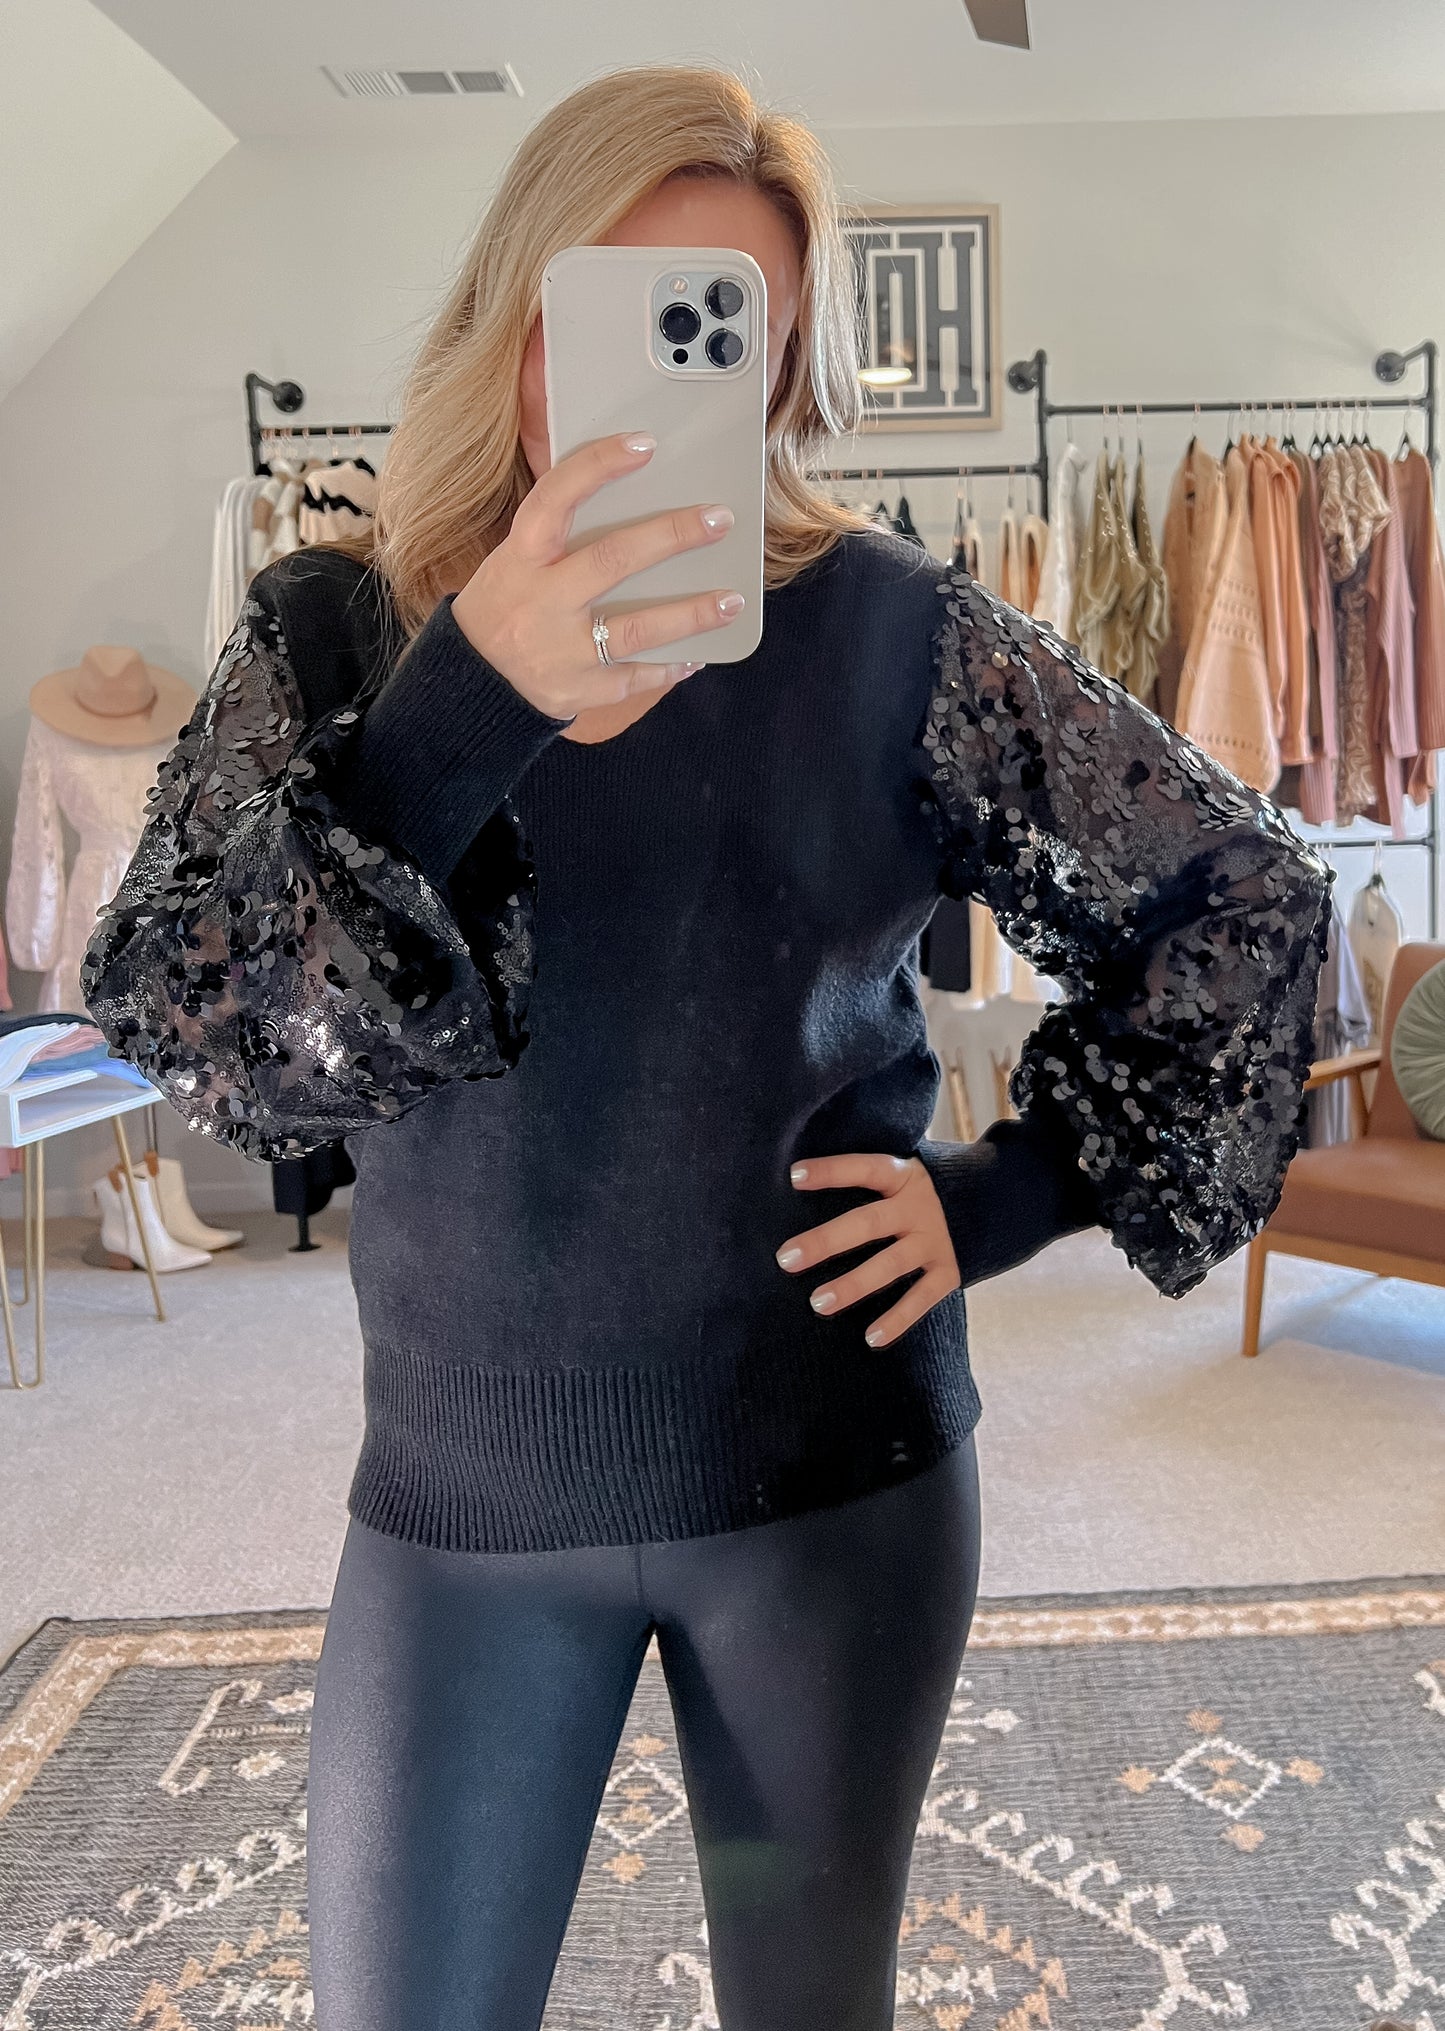 Floral Sequin Sleeve Top